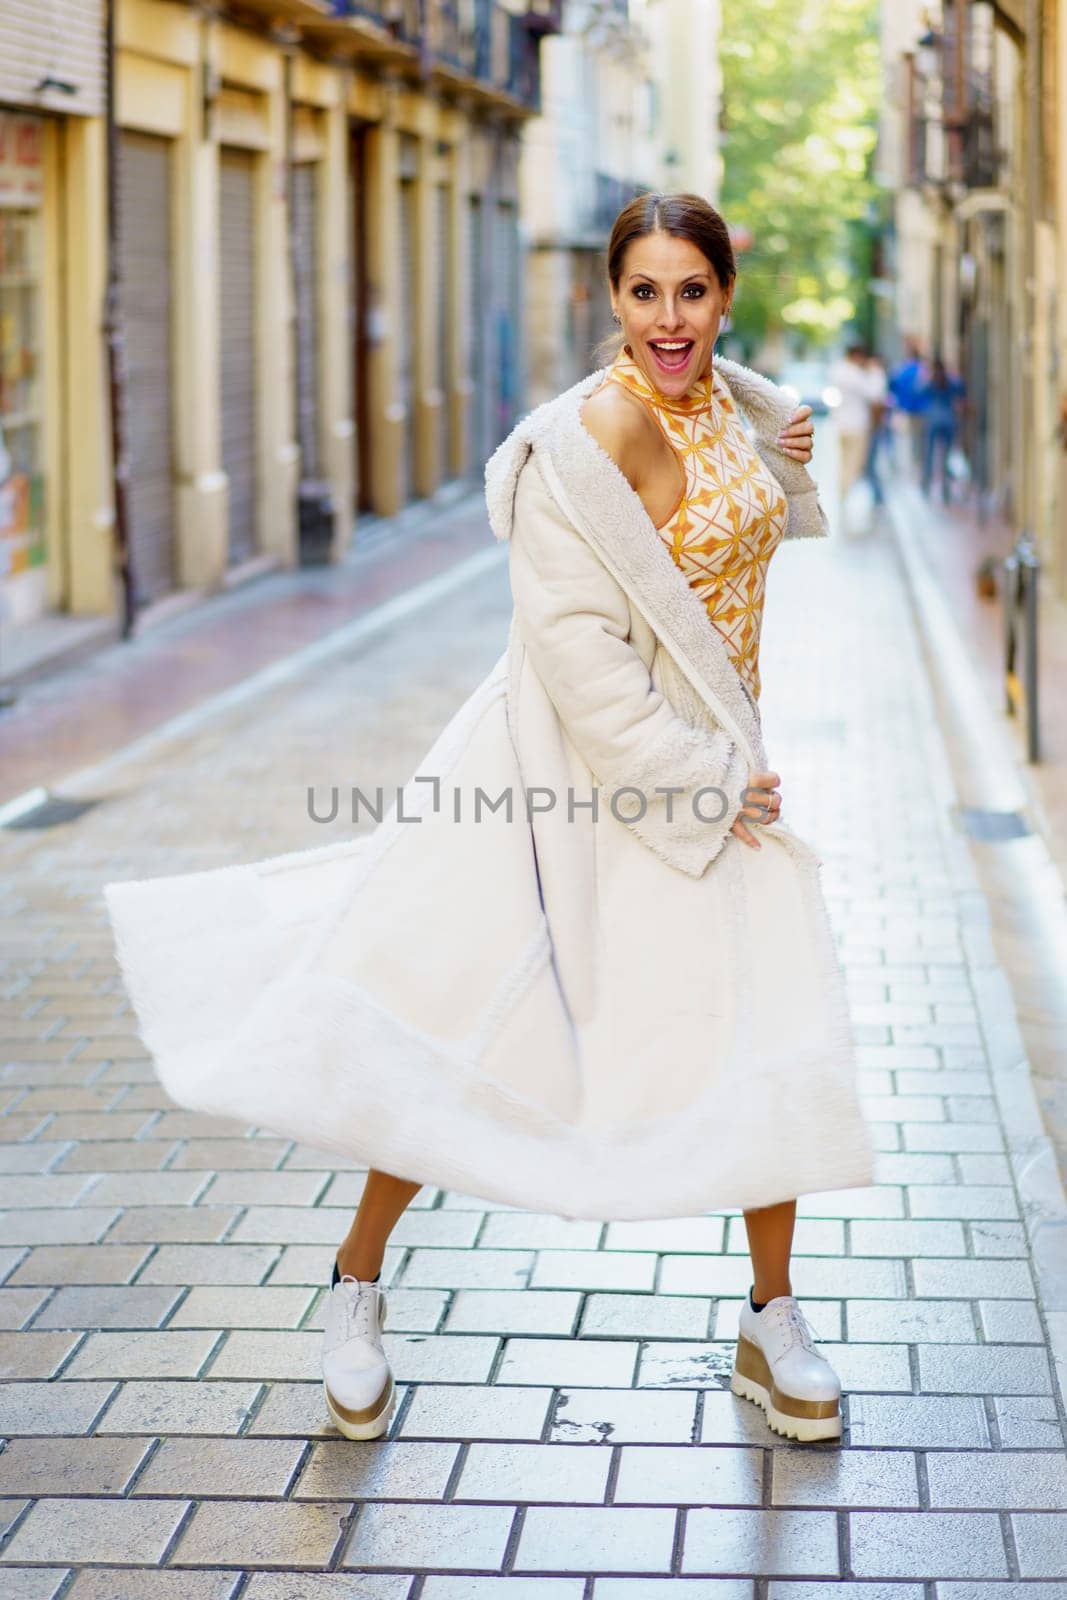 Smiling elegant young female wearing stylish coat and shoes standing on paved street against blurred old buildings and looking at camera